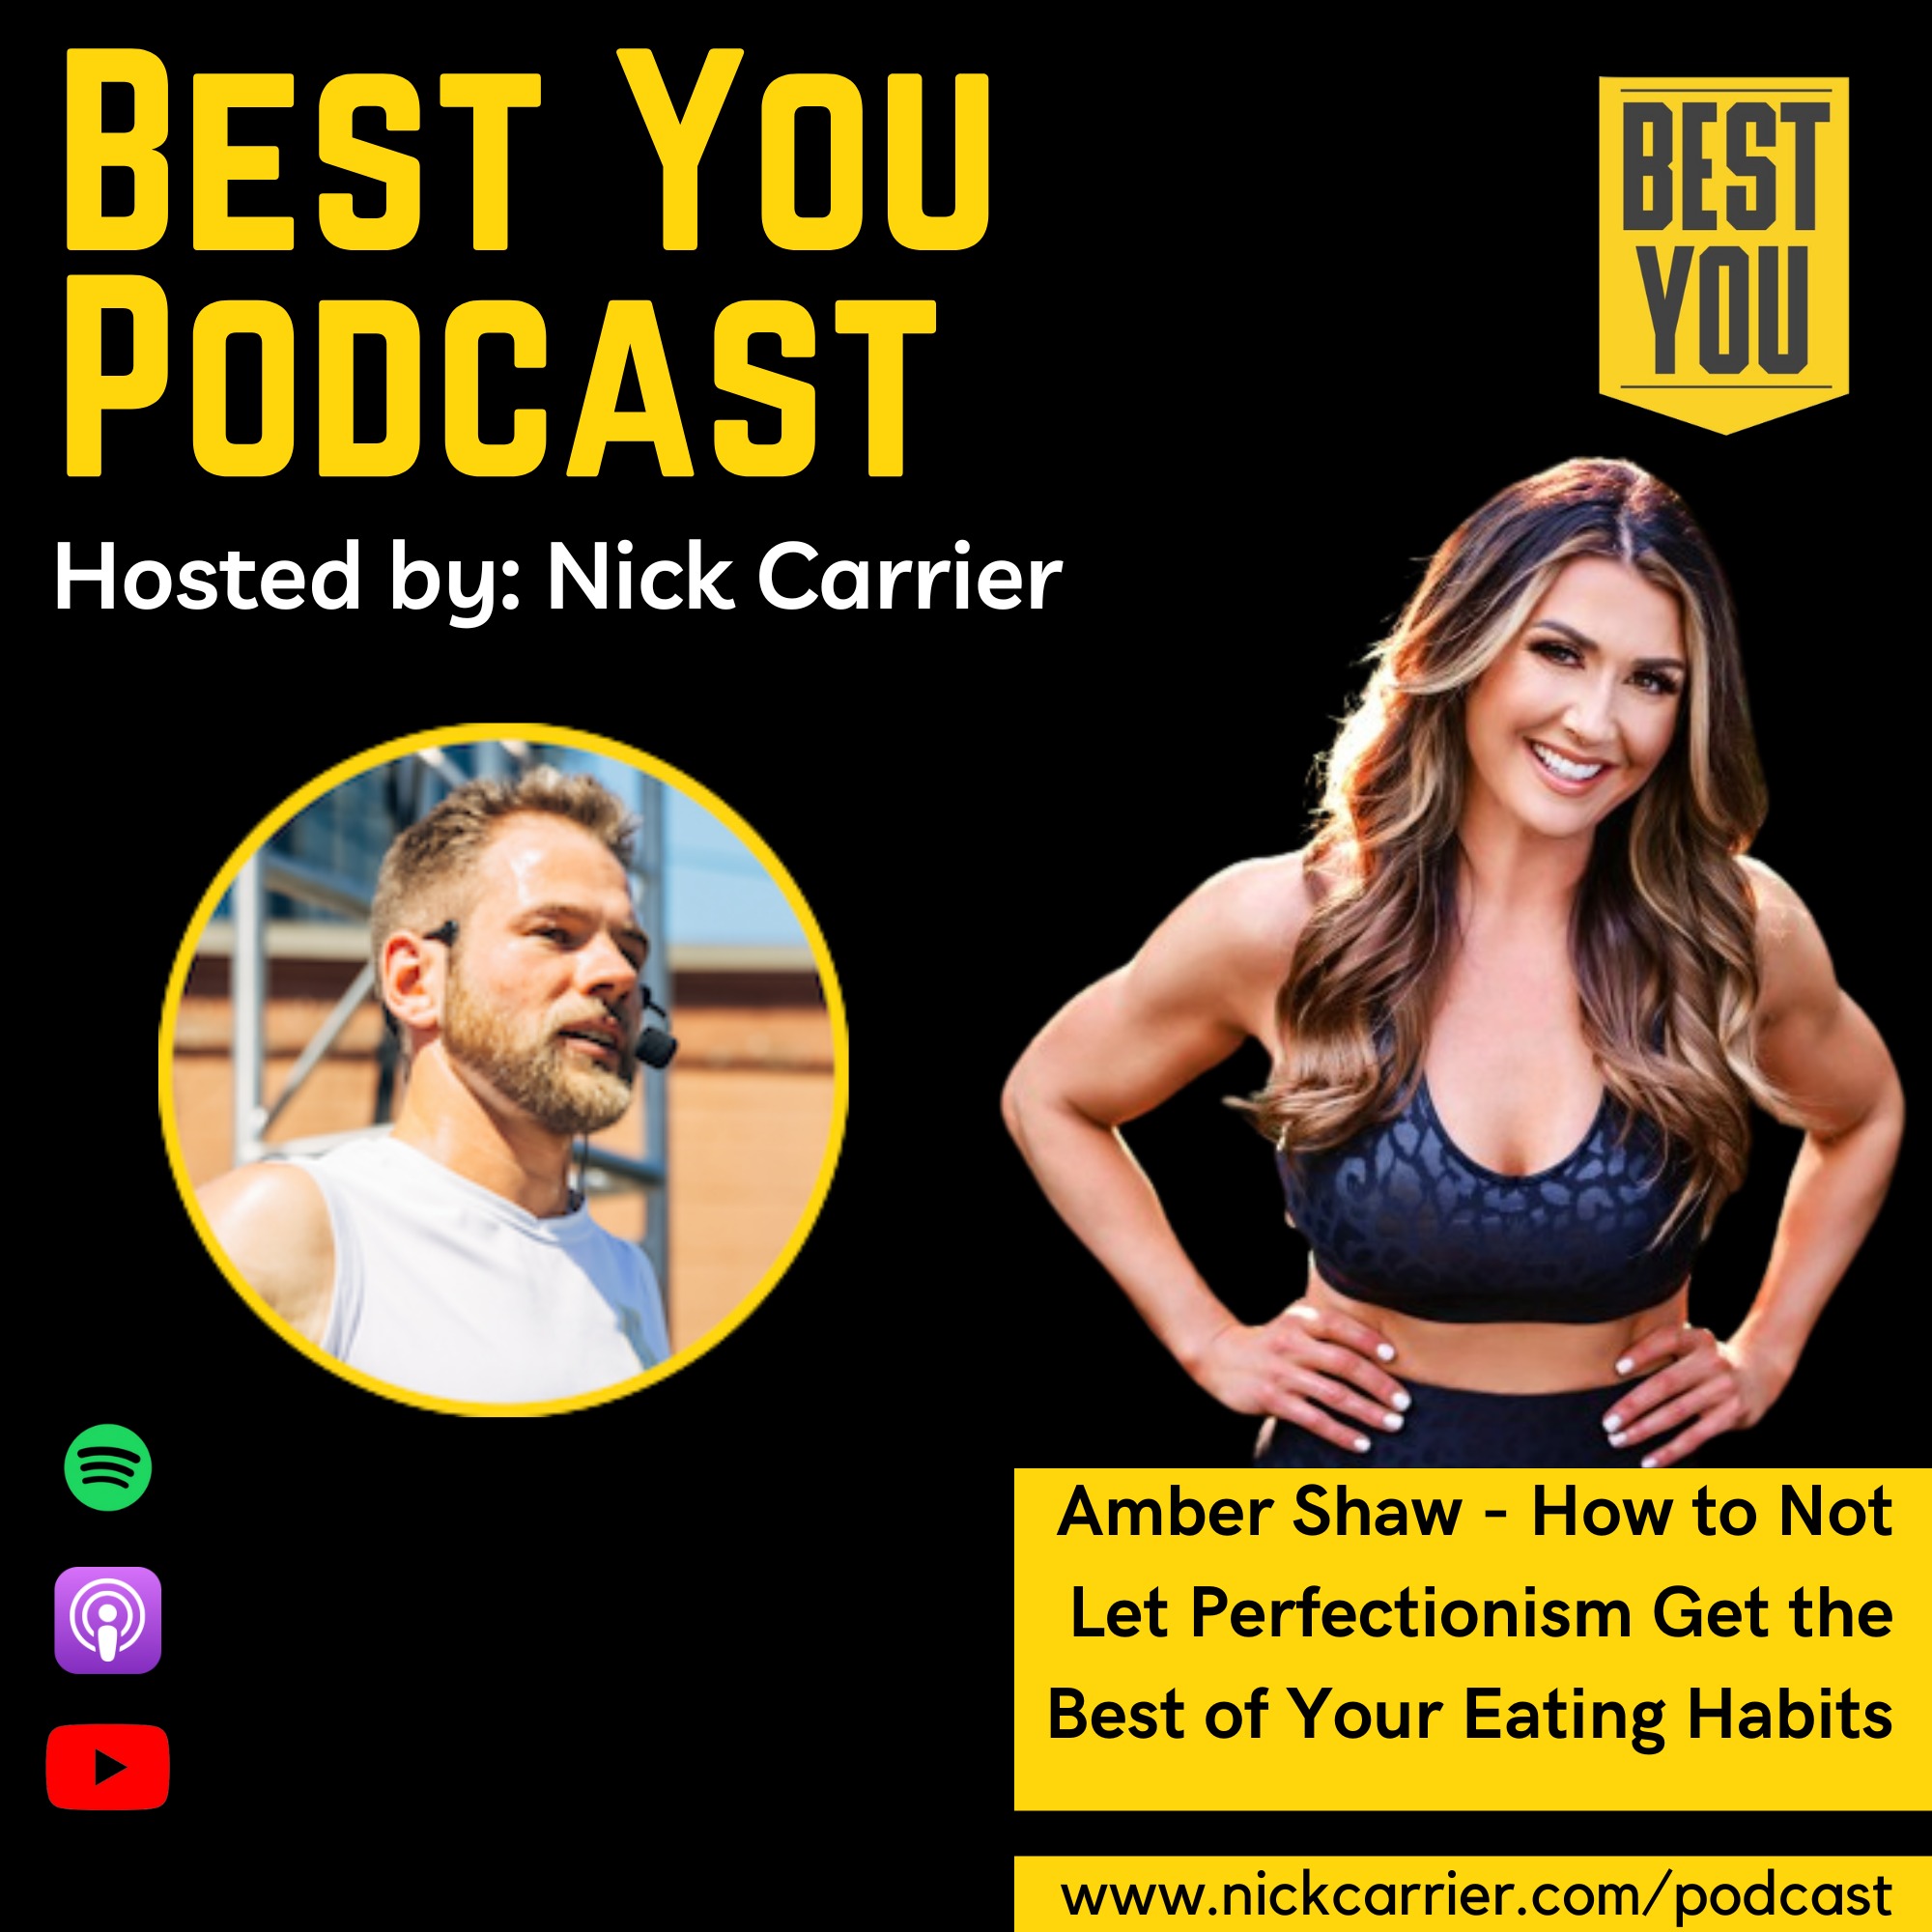 Amber Shaw - How to Not Let Perfectionism Get the Best of Your Eating Habits